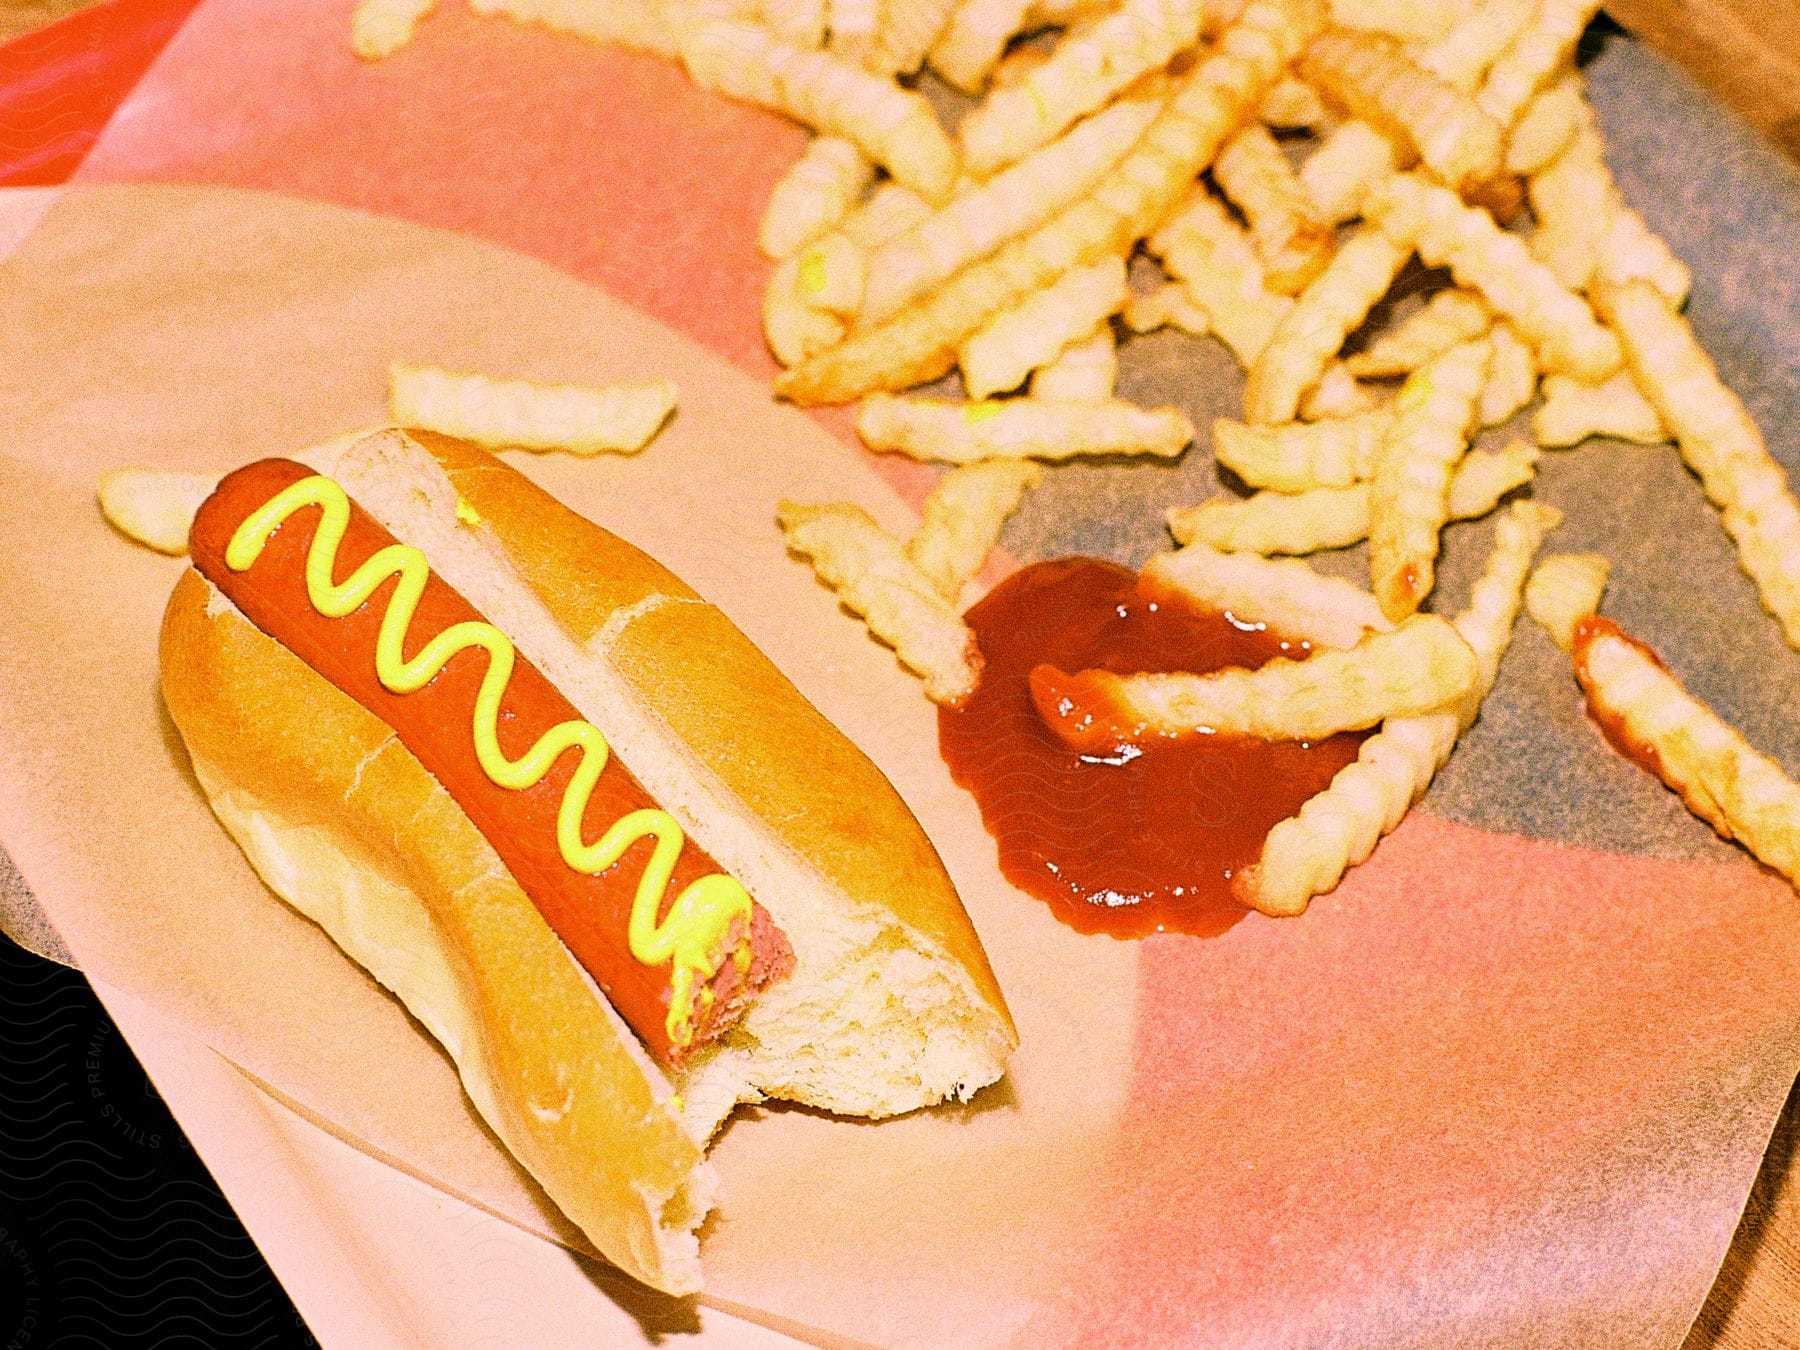 A meal consisting of a hot dog with mustard and a side of wavy fries with ketchup, served on a tray.